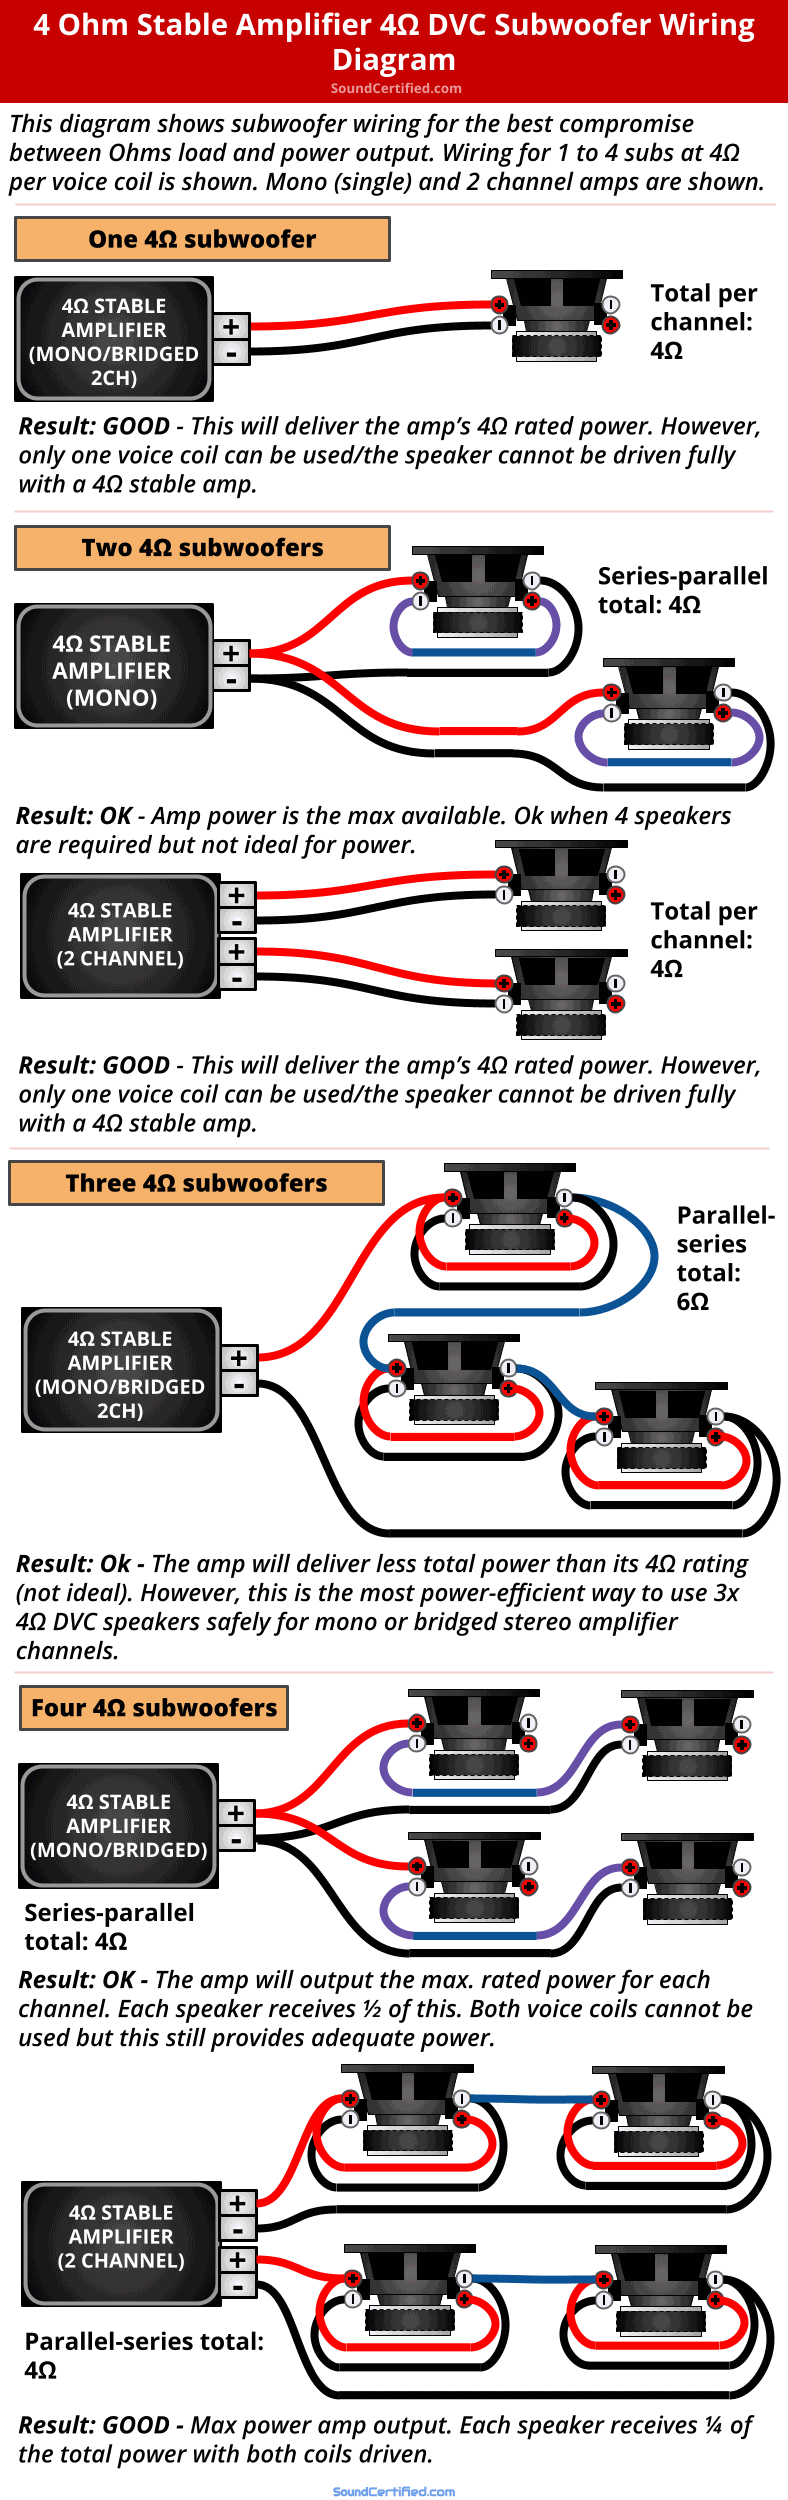 4 ohm stable car amp 4 ohm DVC subwoofer wiring diagram